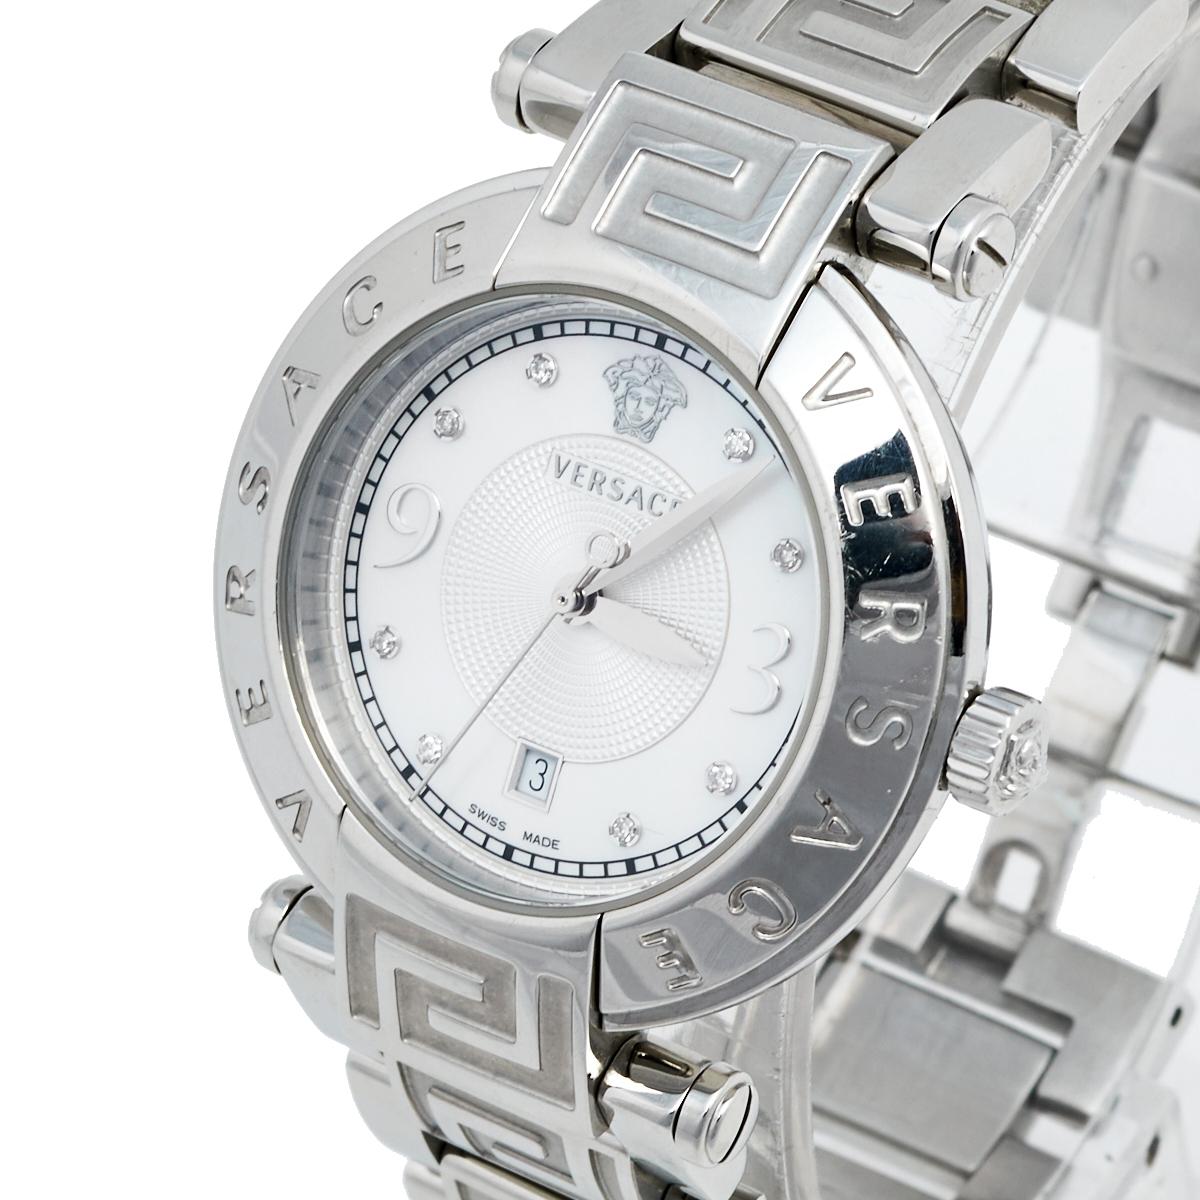 Beautifully designed with the signature Greca pattern of Versace, this Reve timepiece is perfect to add a distinctly stylish and luxurious look. Constructed in stainless steel, this watch features a brand-name carved bezel and a mother of pearl dial